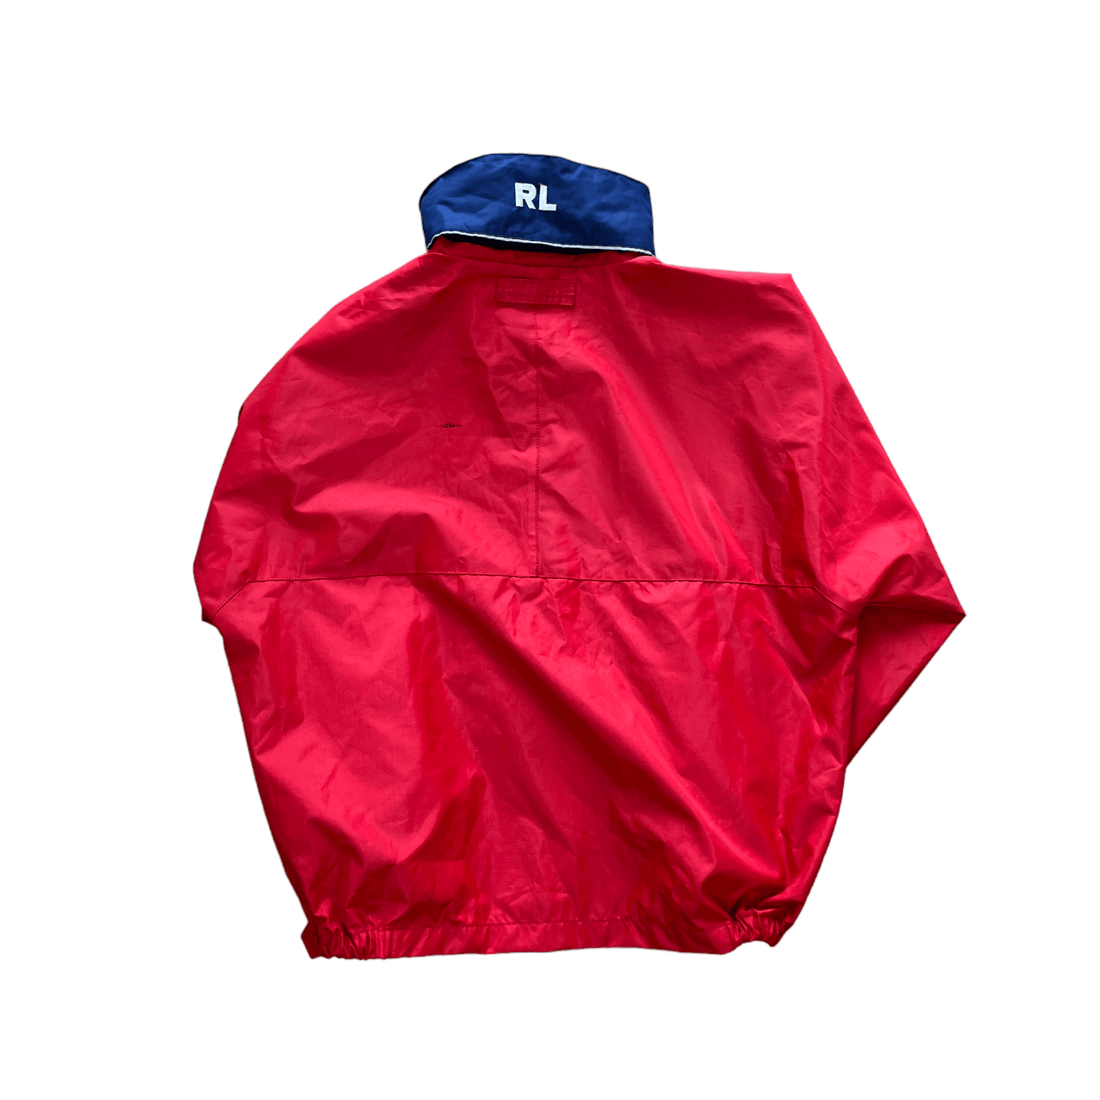 Vintage 90s Red Ralph Lauren Polo Sport Jacket - Extra Large - The Streetwear Studio